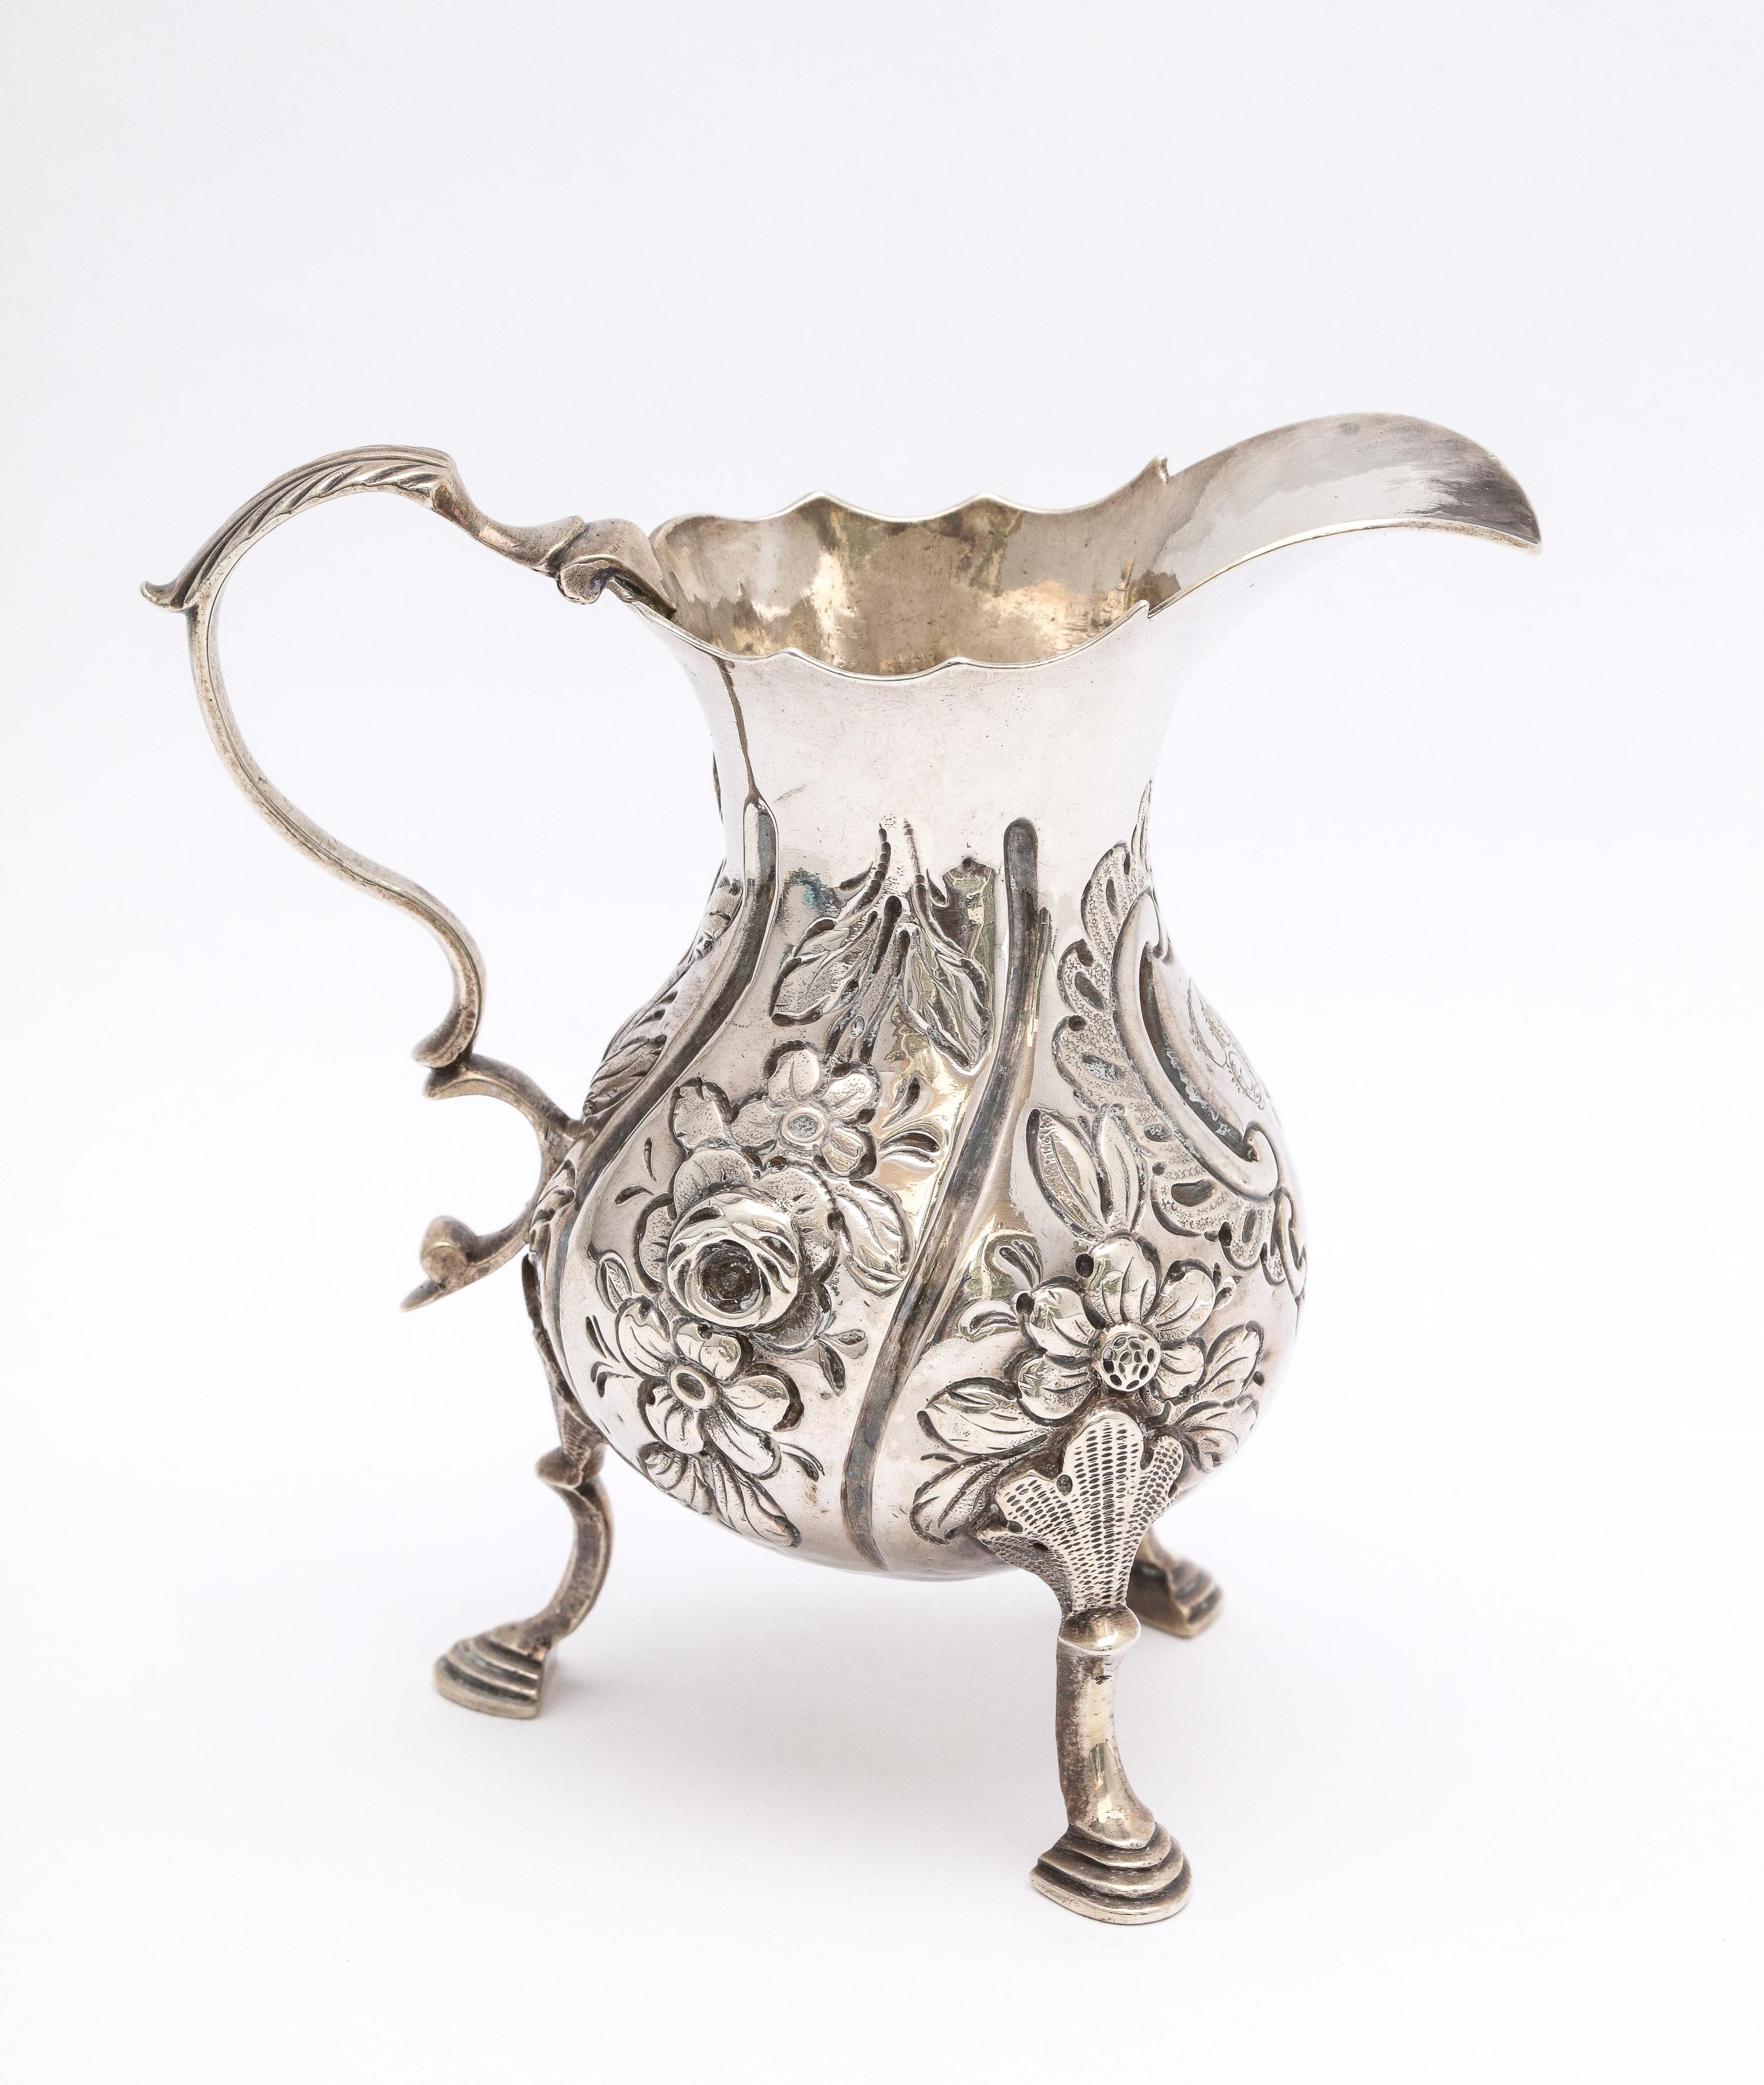 Sterling silver, Georgian (George II), footed cream jug, London, year-hallmarked for 1759, John Muns - maker. Lovely chased work. Measures: 4 inches high (at highest point) x 4 inches wide (from edge of handle to edge of spout) x 2 inches diameter